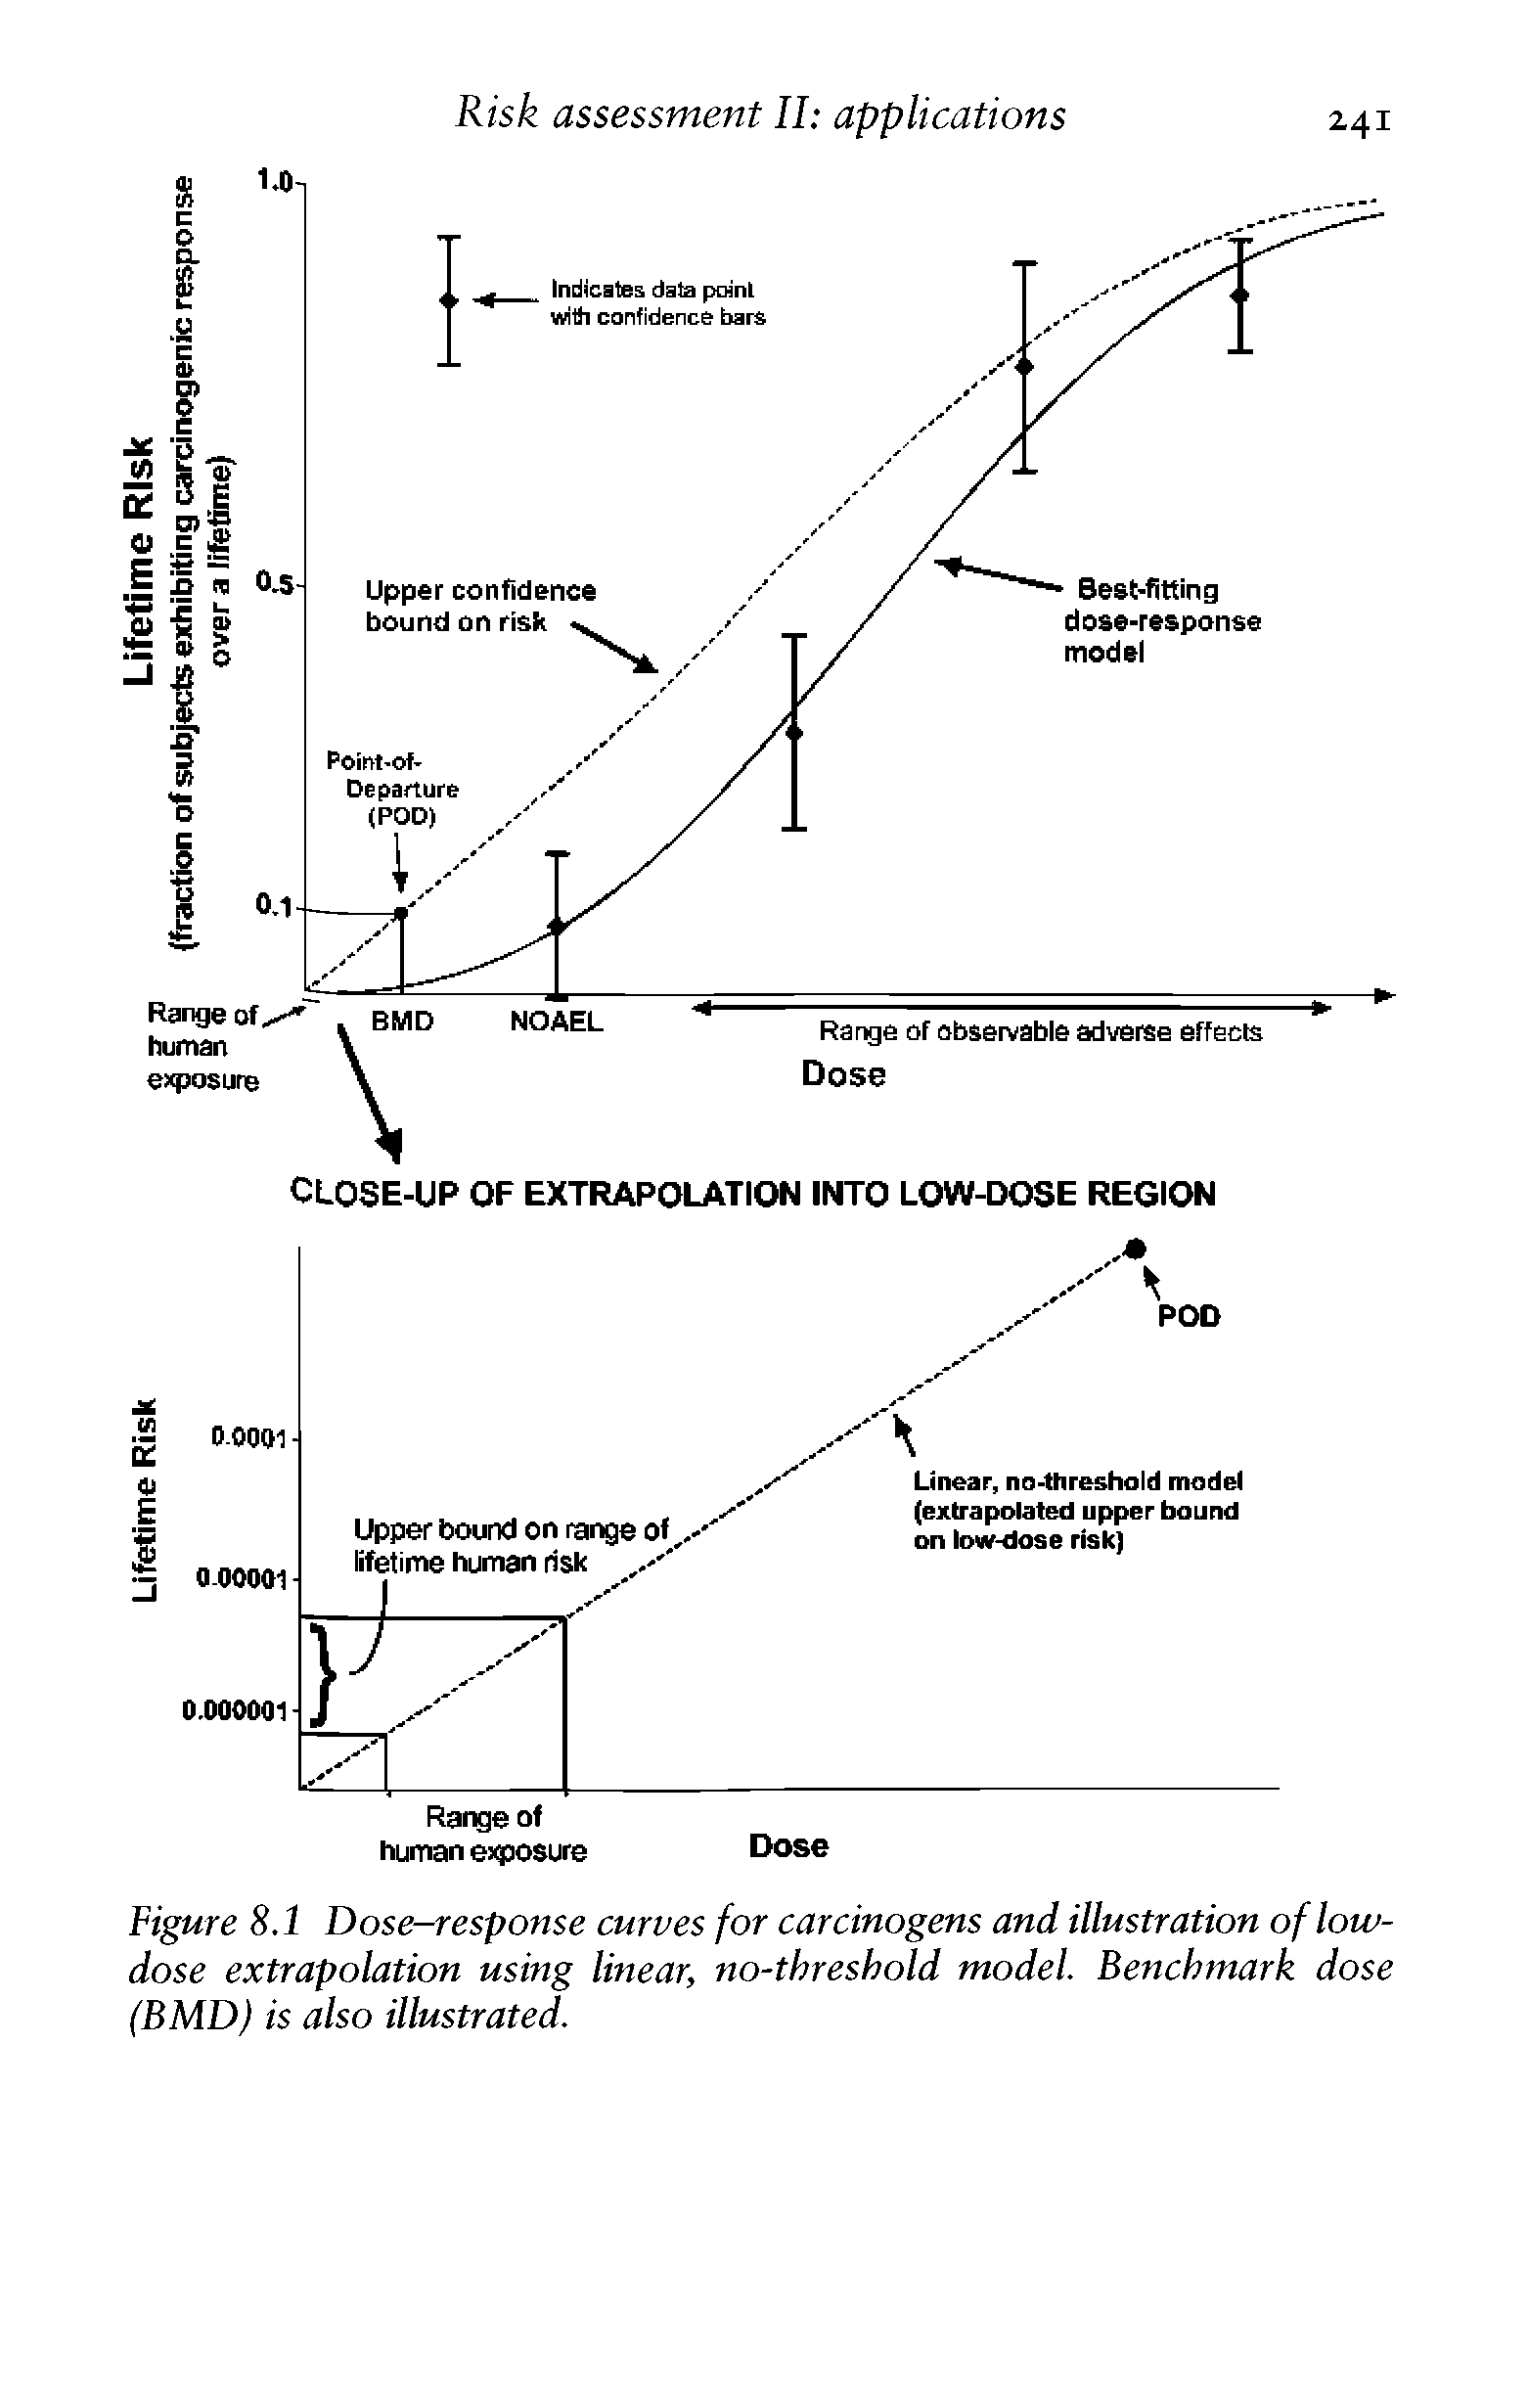 Figure 8.1 Dose-response curves for carcinogens and illustration of low-dose extrapolation using linear, no-threshold model. Benchmark dose (BMD) is also illustrated.